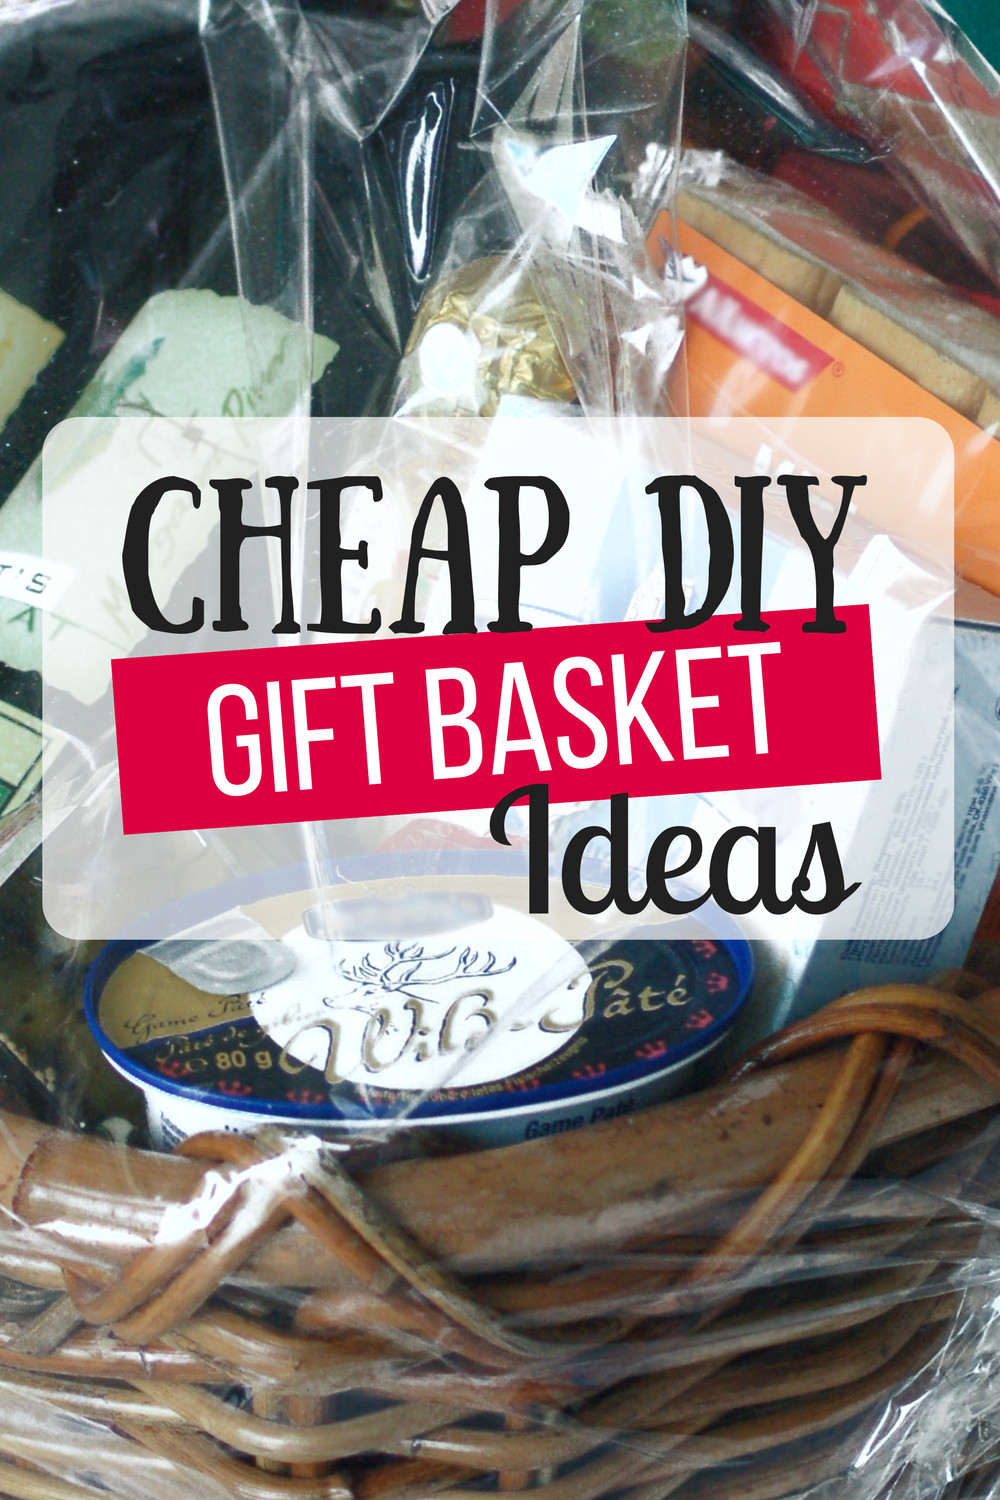 Ideas For Christmas Gift Baskets Inexpensive
 Cheap DIY Gift Baskets The Busy Bud er